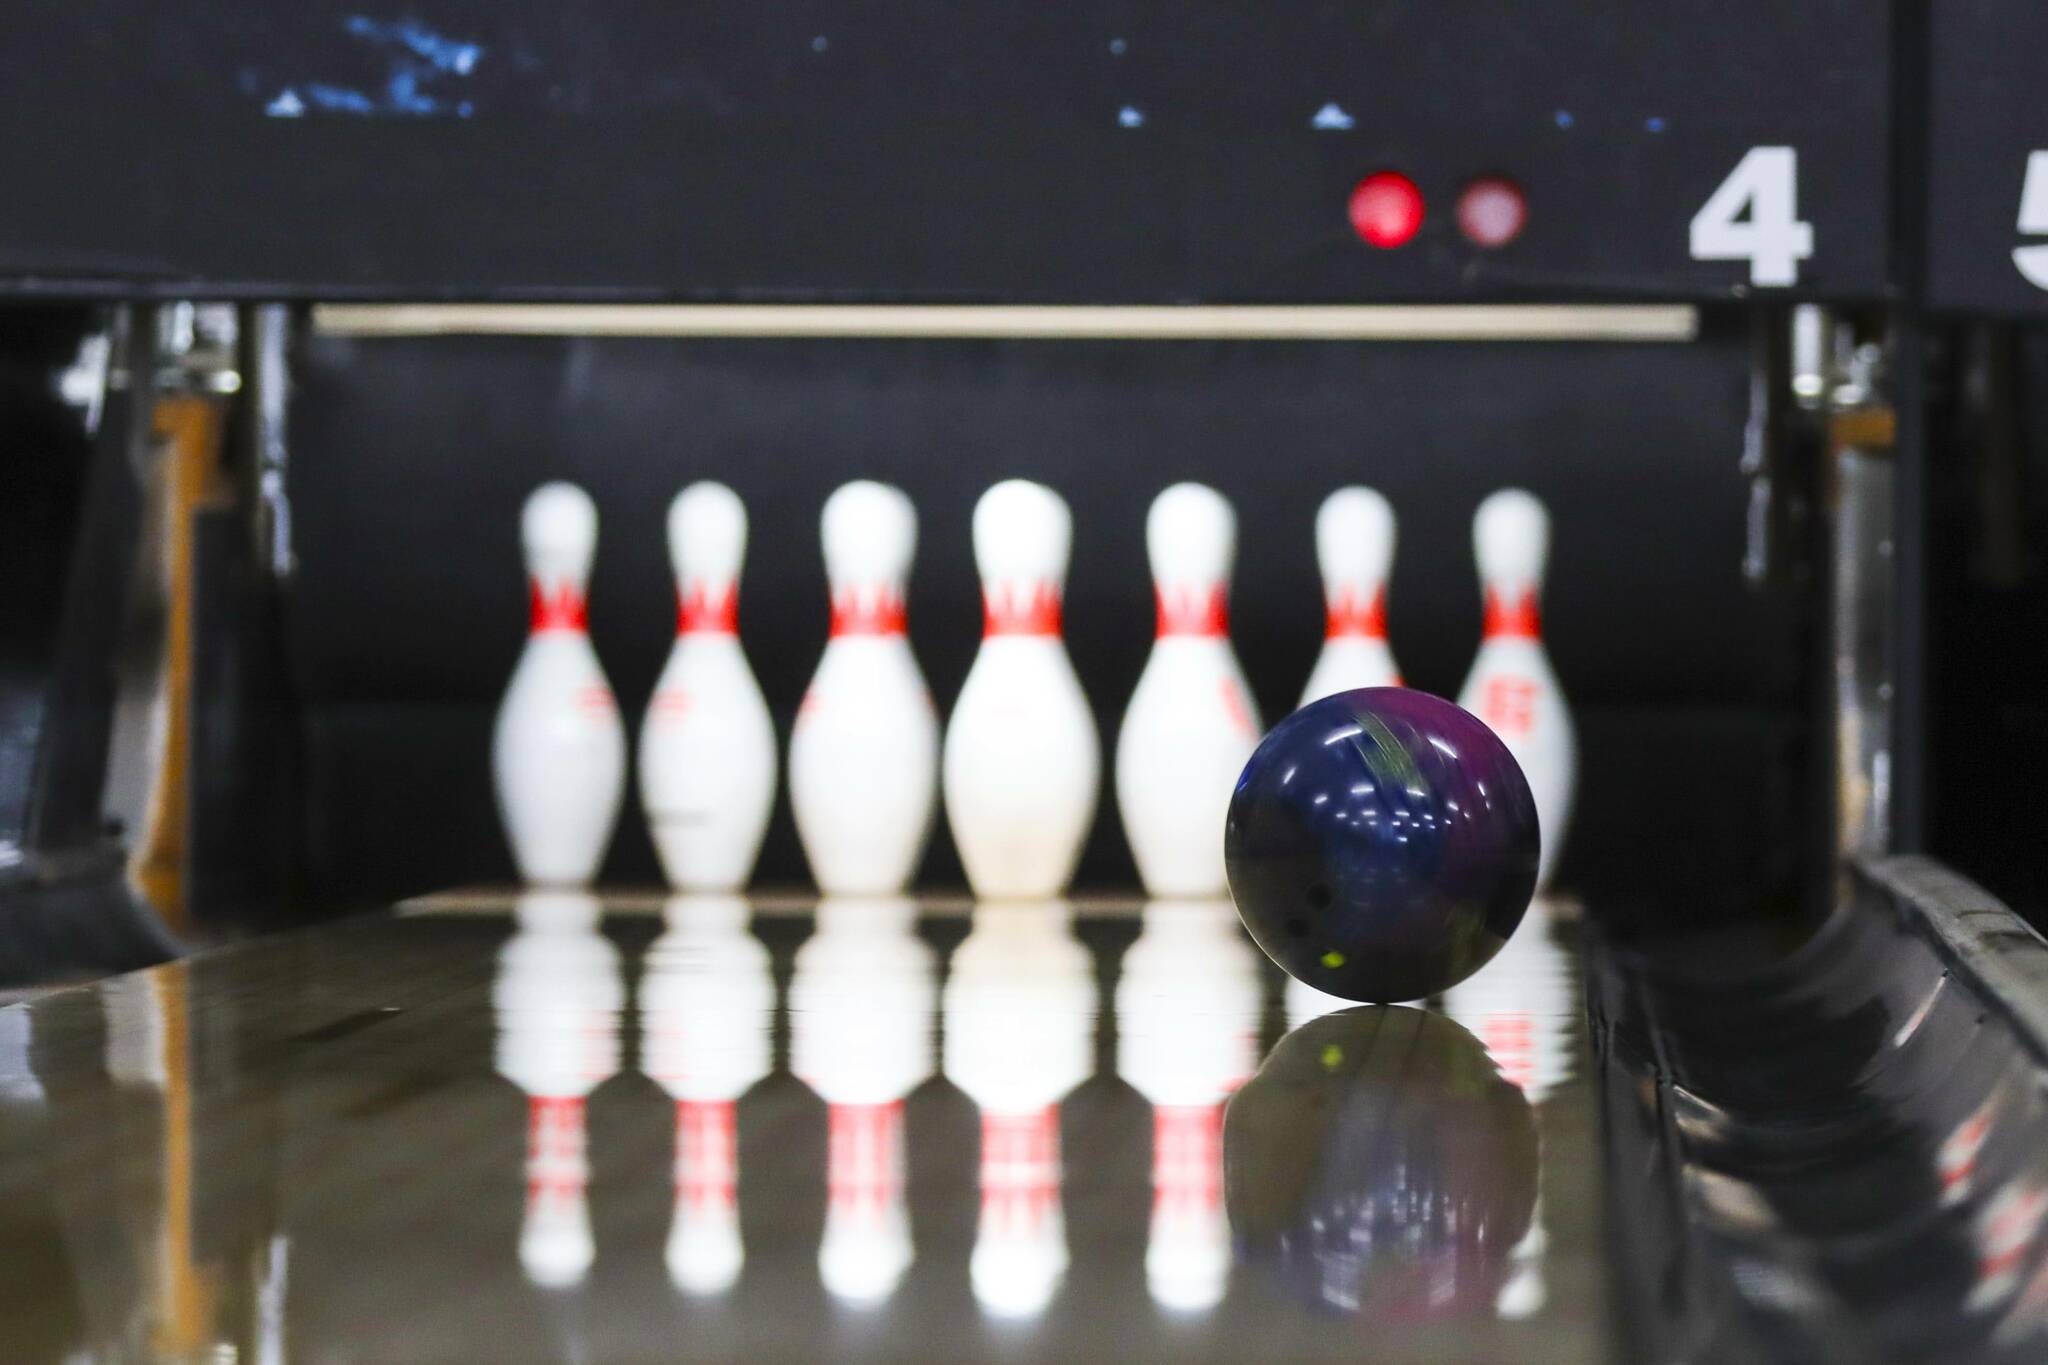 A ball streaks down the lane at an unbroken formation of pins at Pinz, Juneau’s bowling alley, on May 5, 2022. (Michael S. Lockett / Juneau Empire)